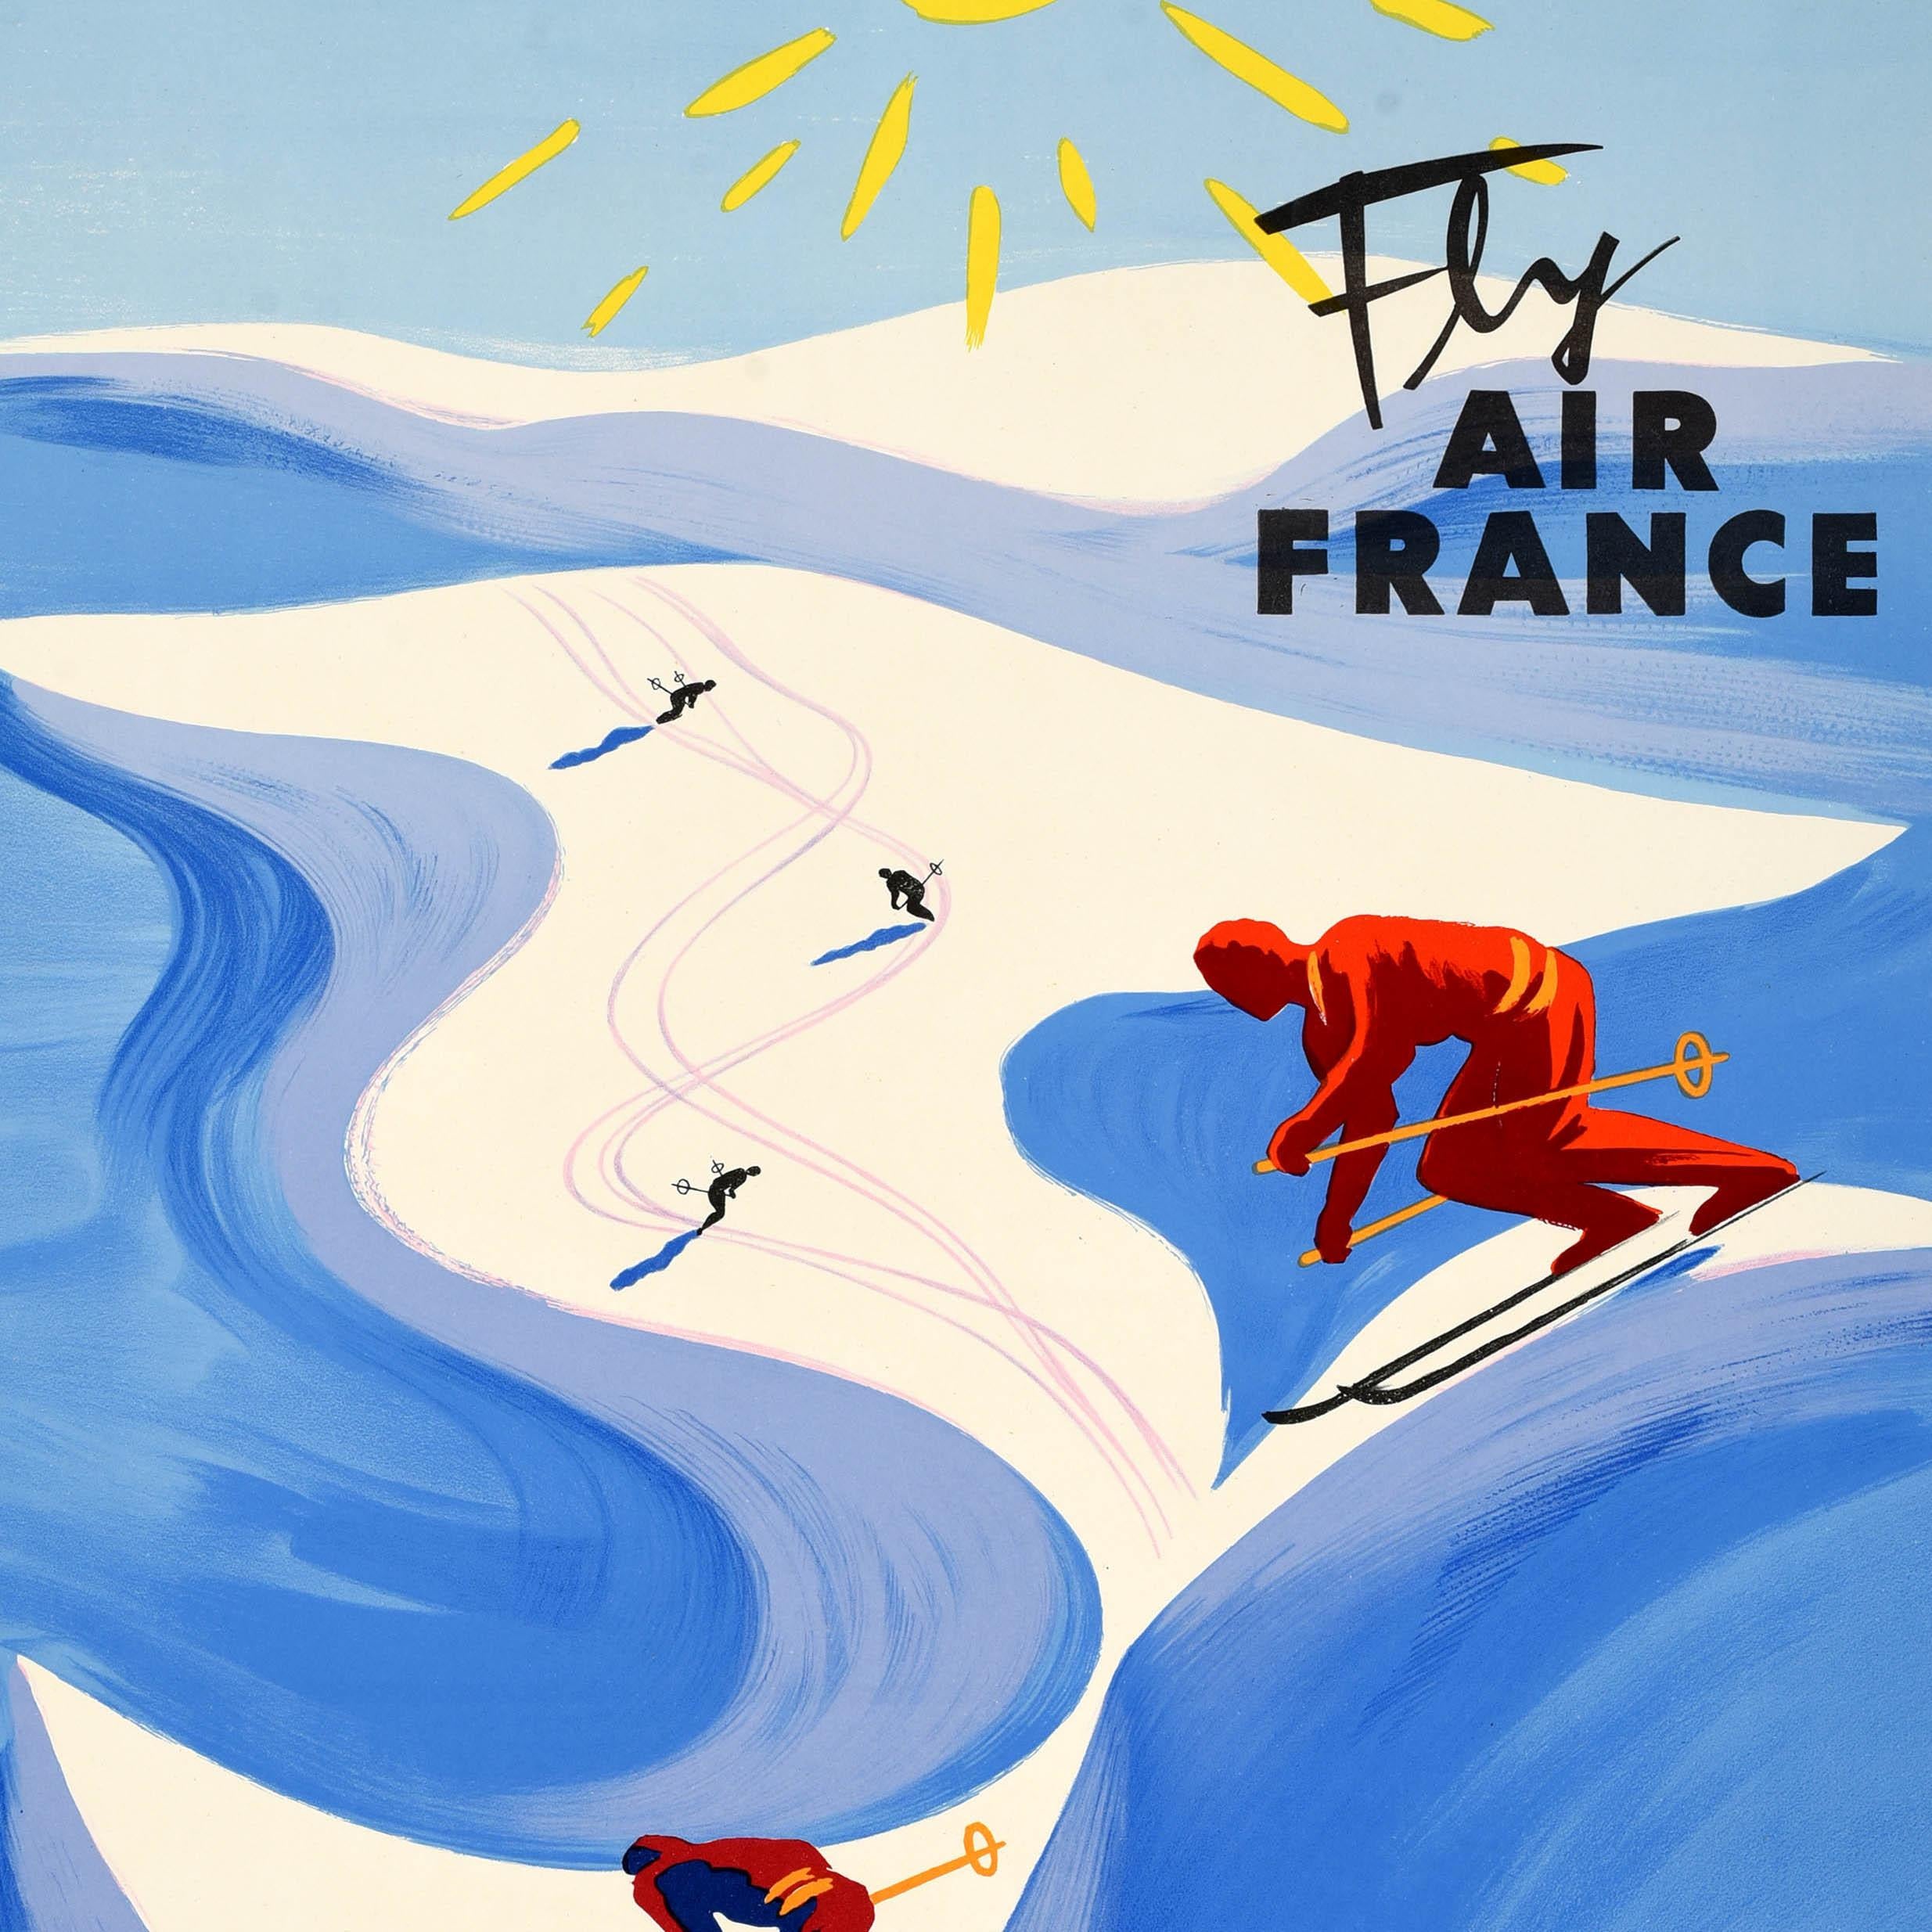 Original vintage ski travel poster - Winter Sports Fly Air France - featuring colourful artwork by the renowned graphic artist Bernard Villemot (1911-1989) depicting skiers skiing down snowy slopes on mountains in shades of white and blue lit up by